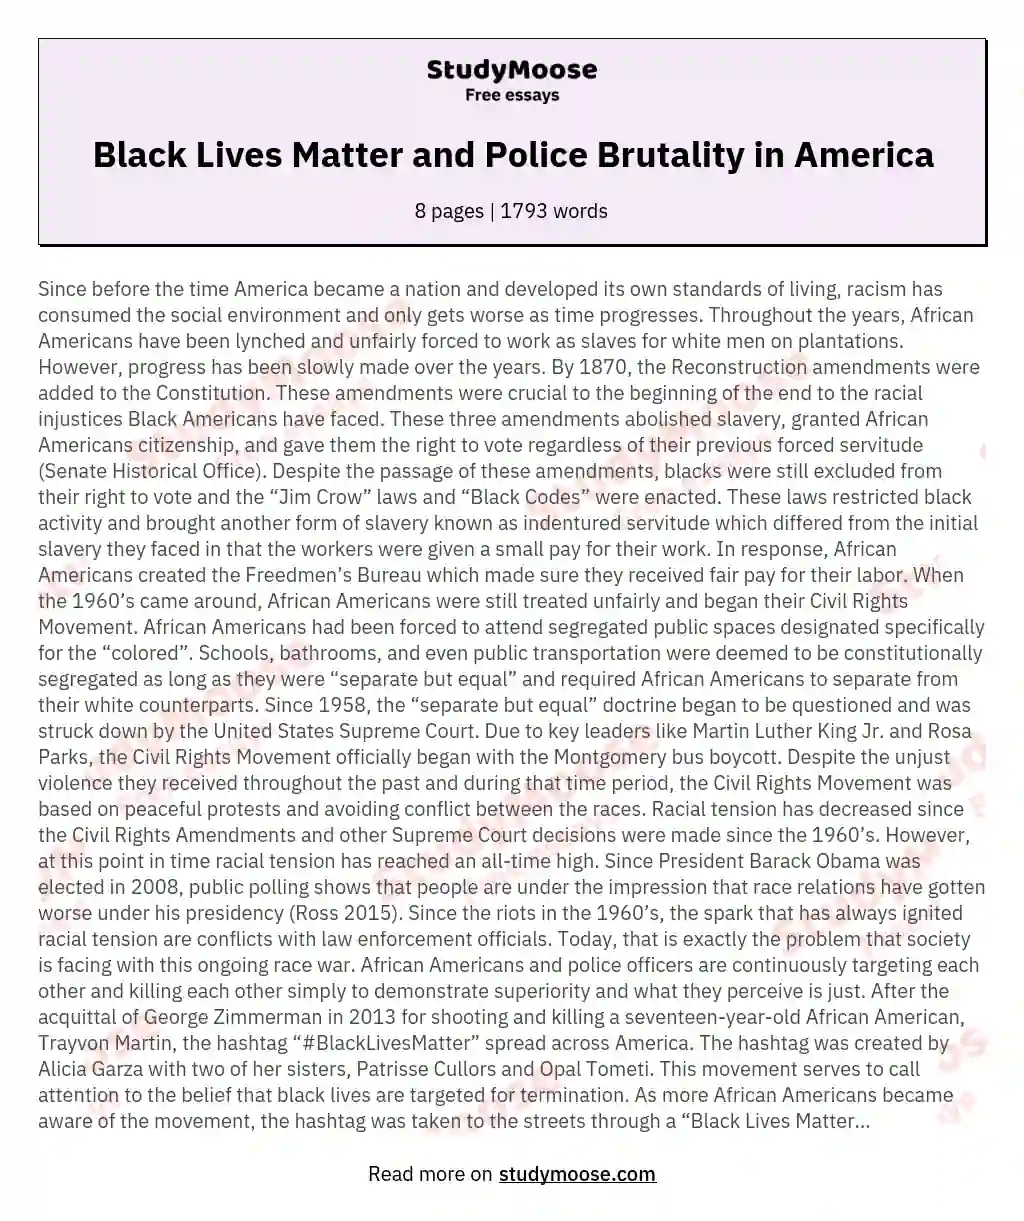 Black Lives Matter and Police Brutality in America